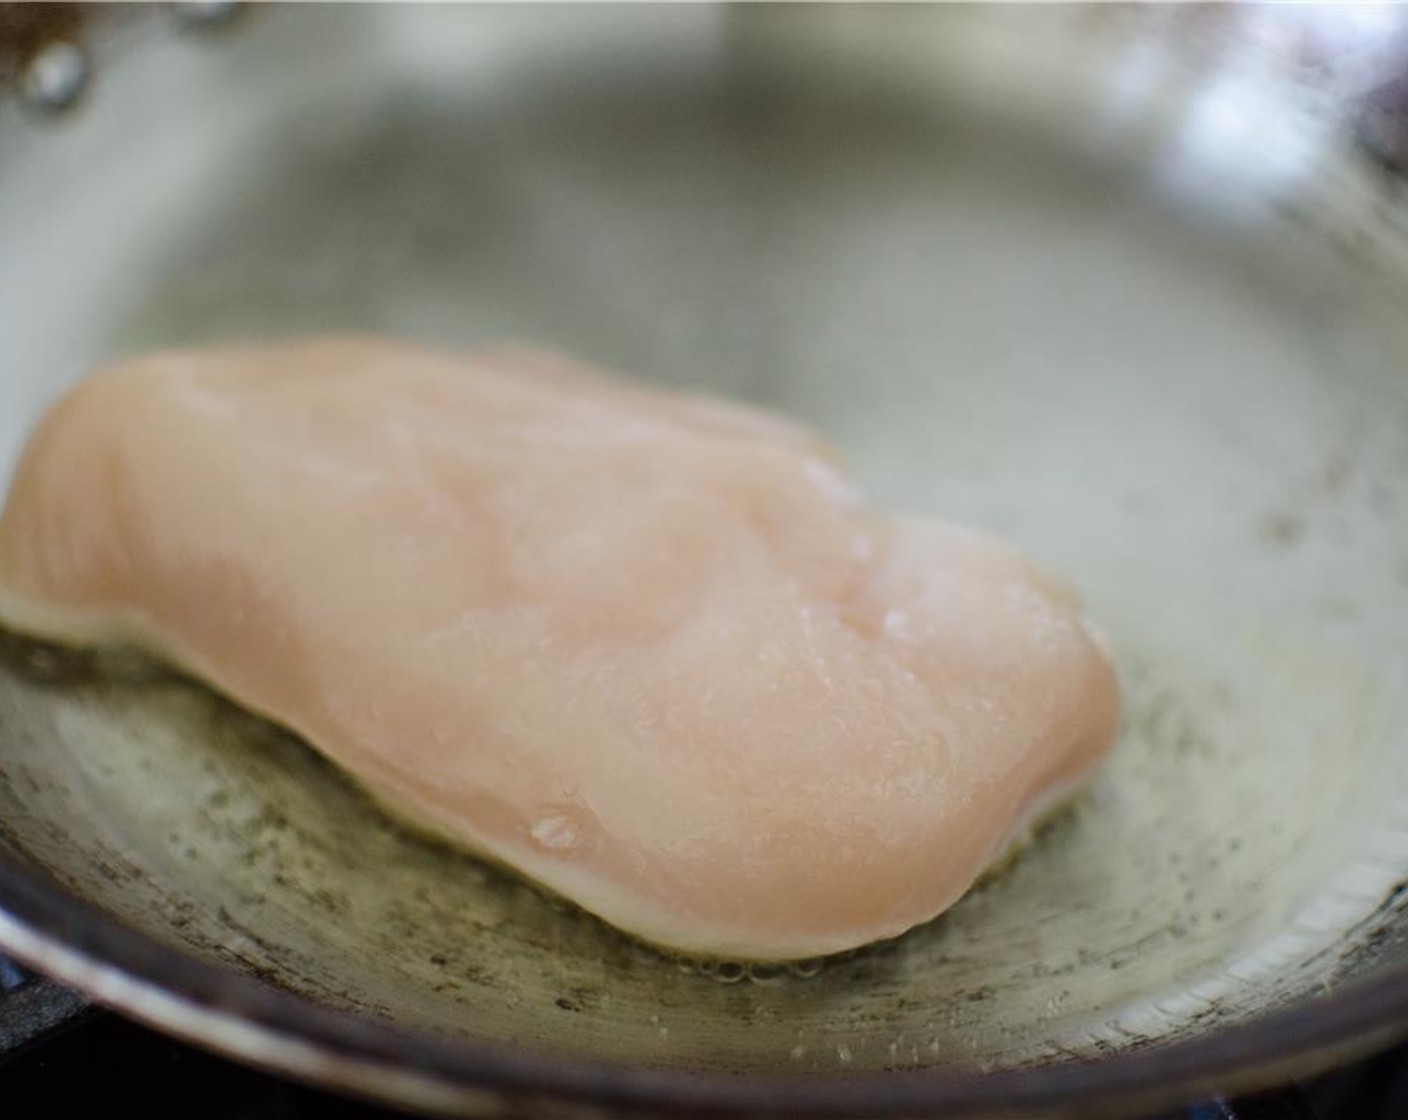 step 5 Heat pan to medium heat with Extra-Virgin Olive Oil (1/2 Tbsp). Cook Chicken Breasts (2) for 3-4 minutes per side or until cooked through. In the last minute of cooking time, pour remaining Soy Sauce (1 Tbsp) over breasts.